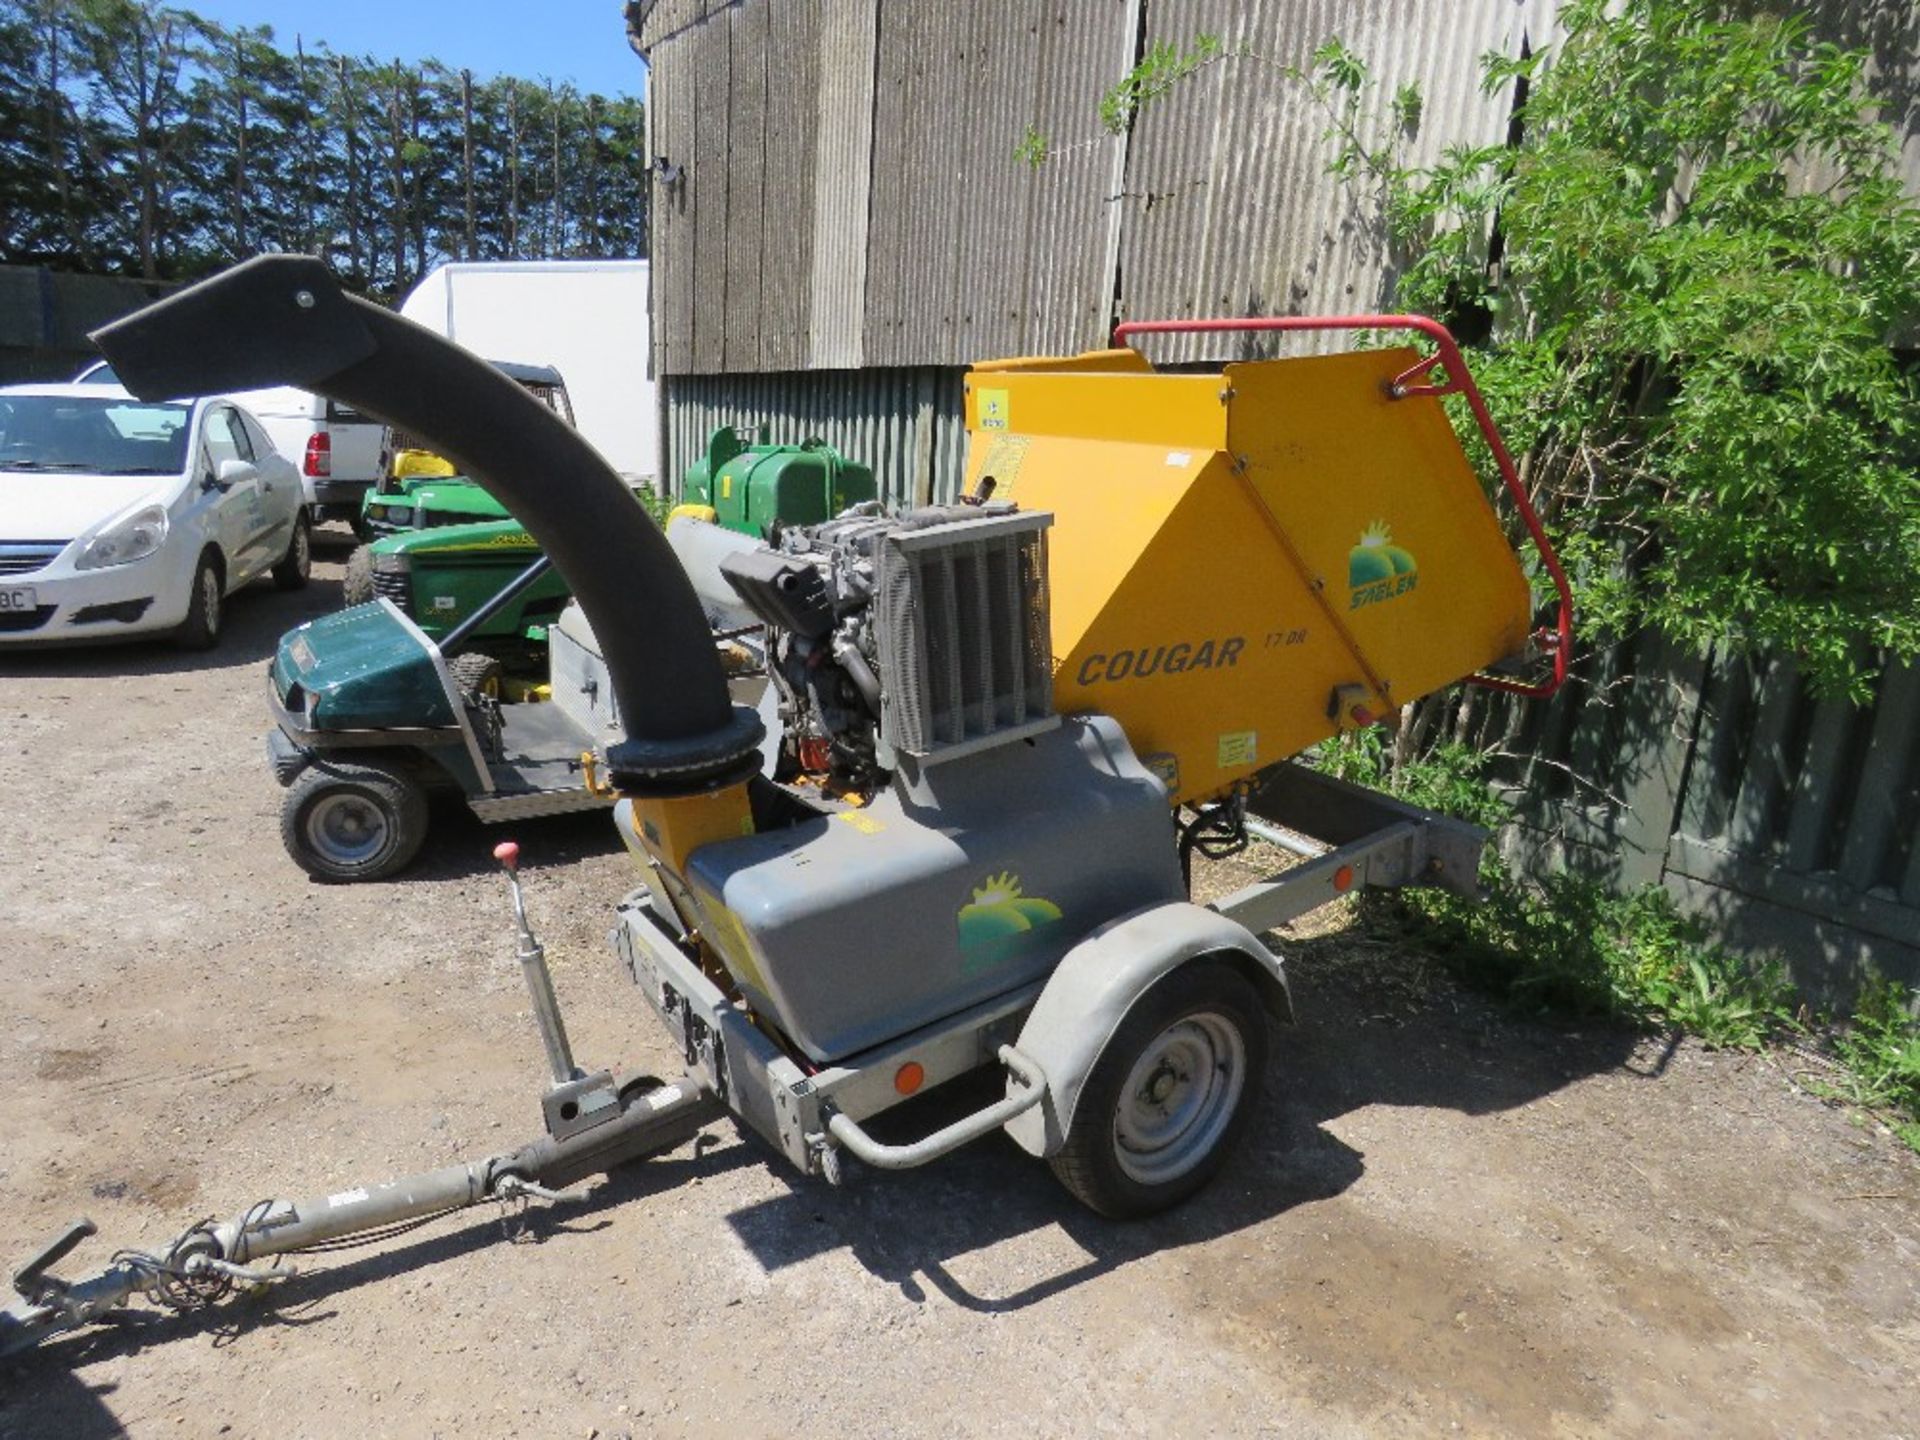 SAELEN COUGAR DR17 EVO DIESEL ENGINED CHIPPER, YEAR 2011. 251 REC HOURS. SN:11101. WHEN TESTED WAS S - Image 2 of 7